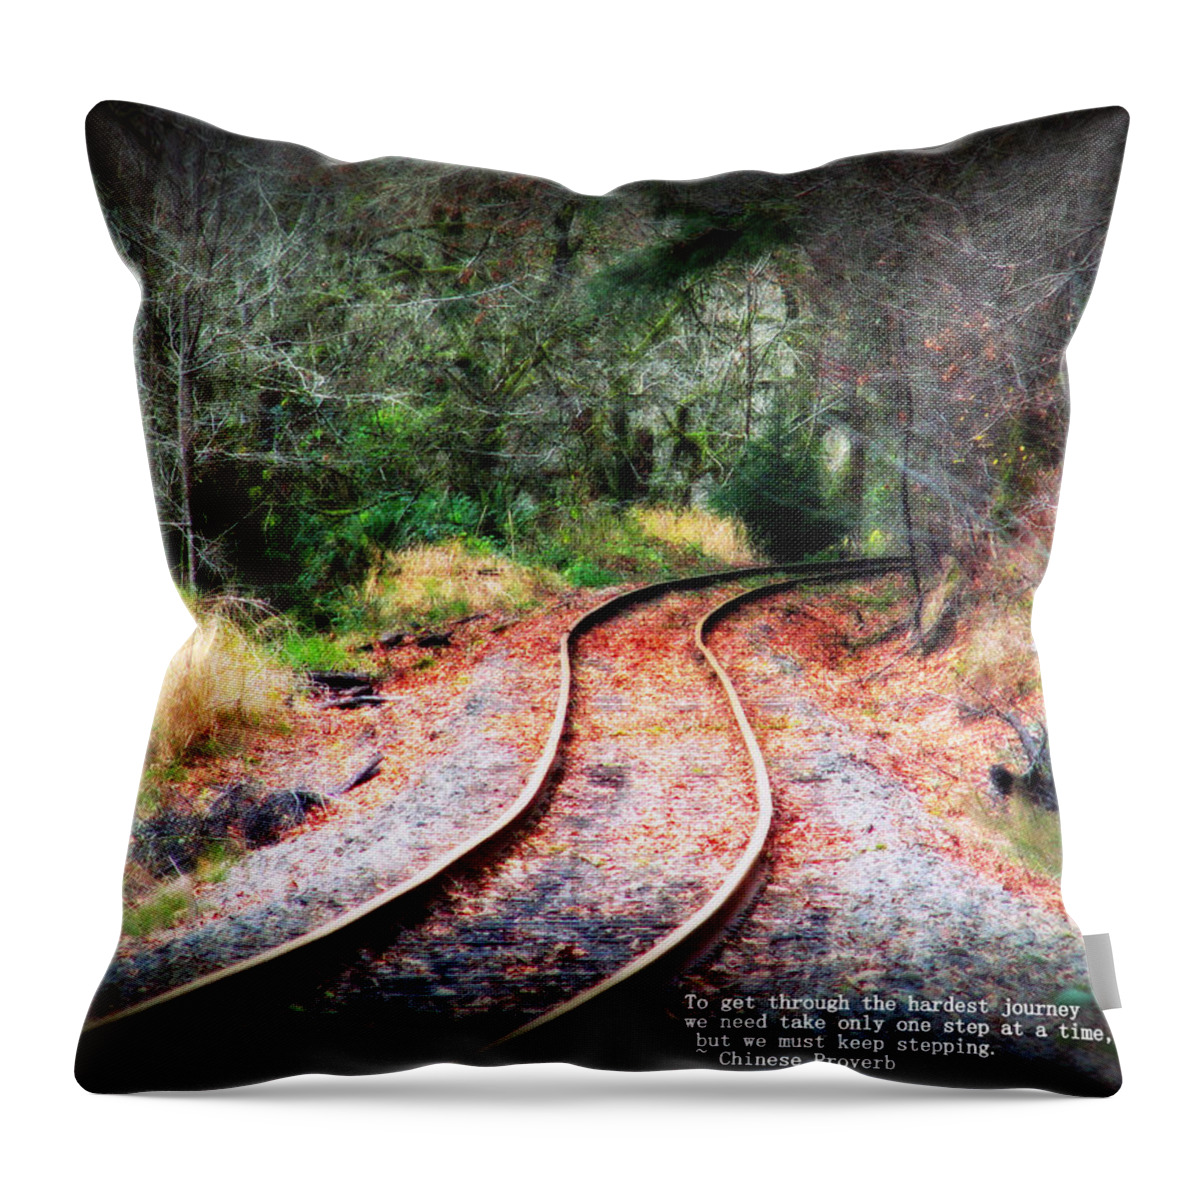 Railroad Throw Pillow featuring the photograph A Journey of Dreams Inspirational by Melanie Lankford Photography